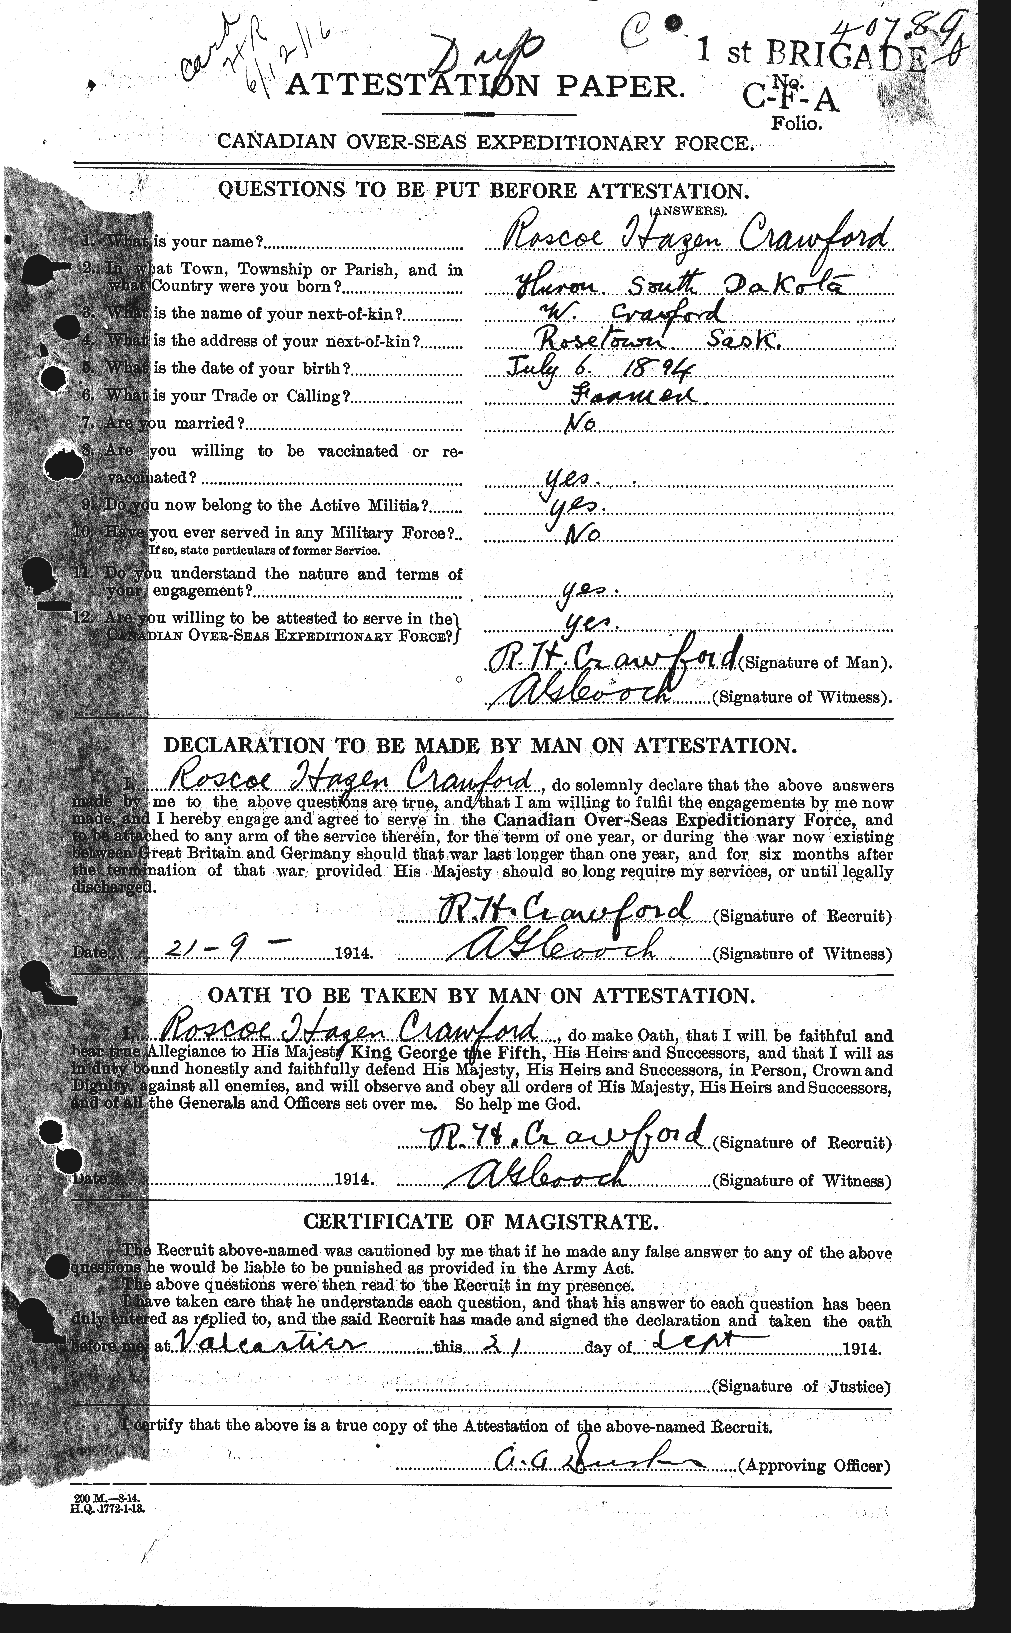 Personnel Records of the First World War - CEF 061389a